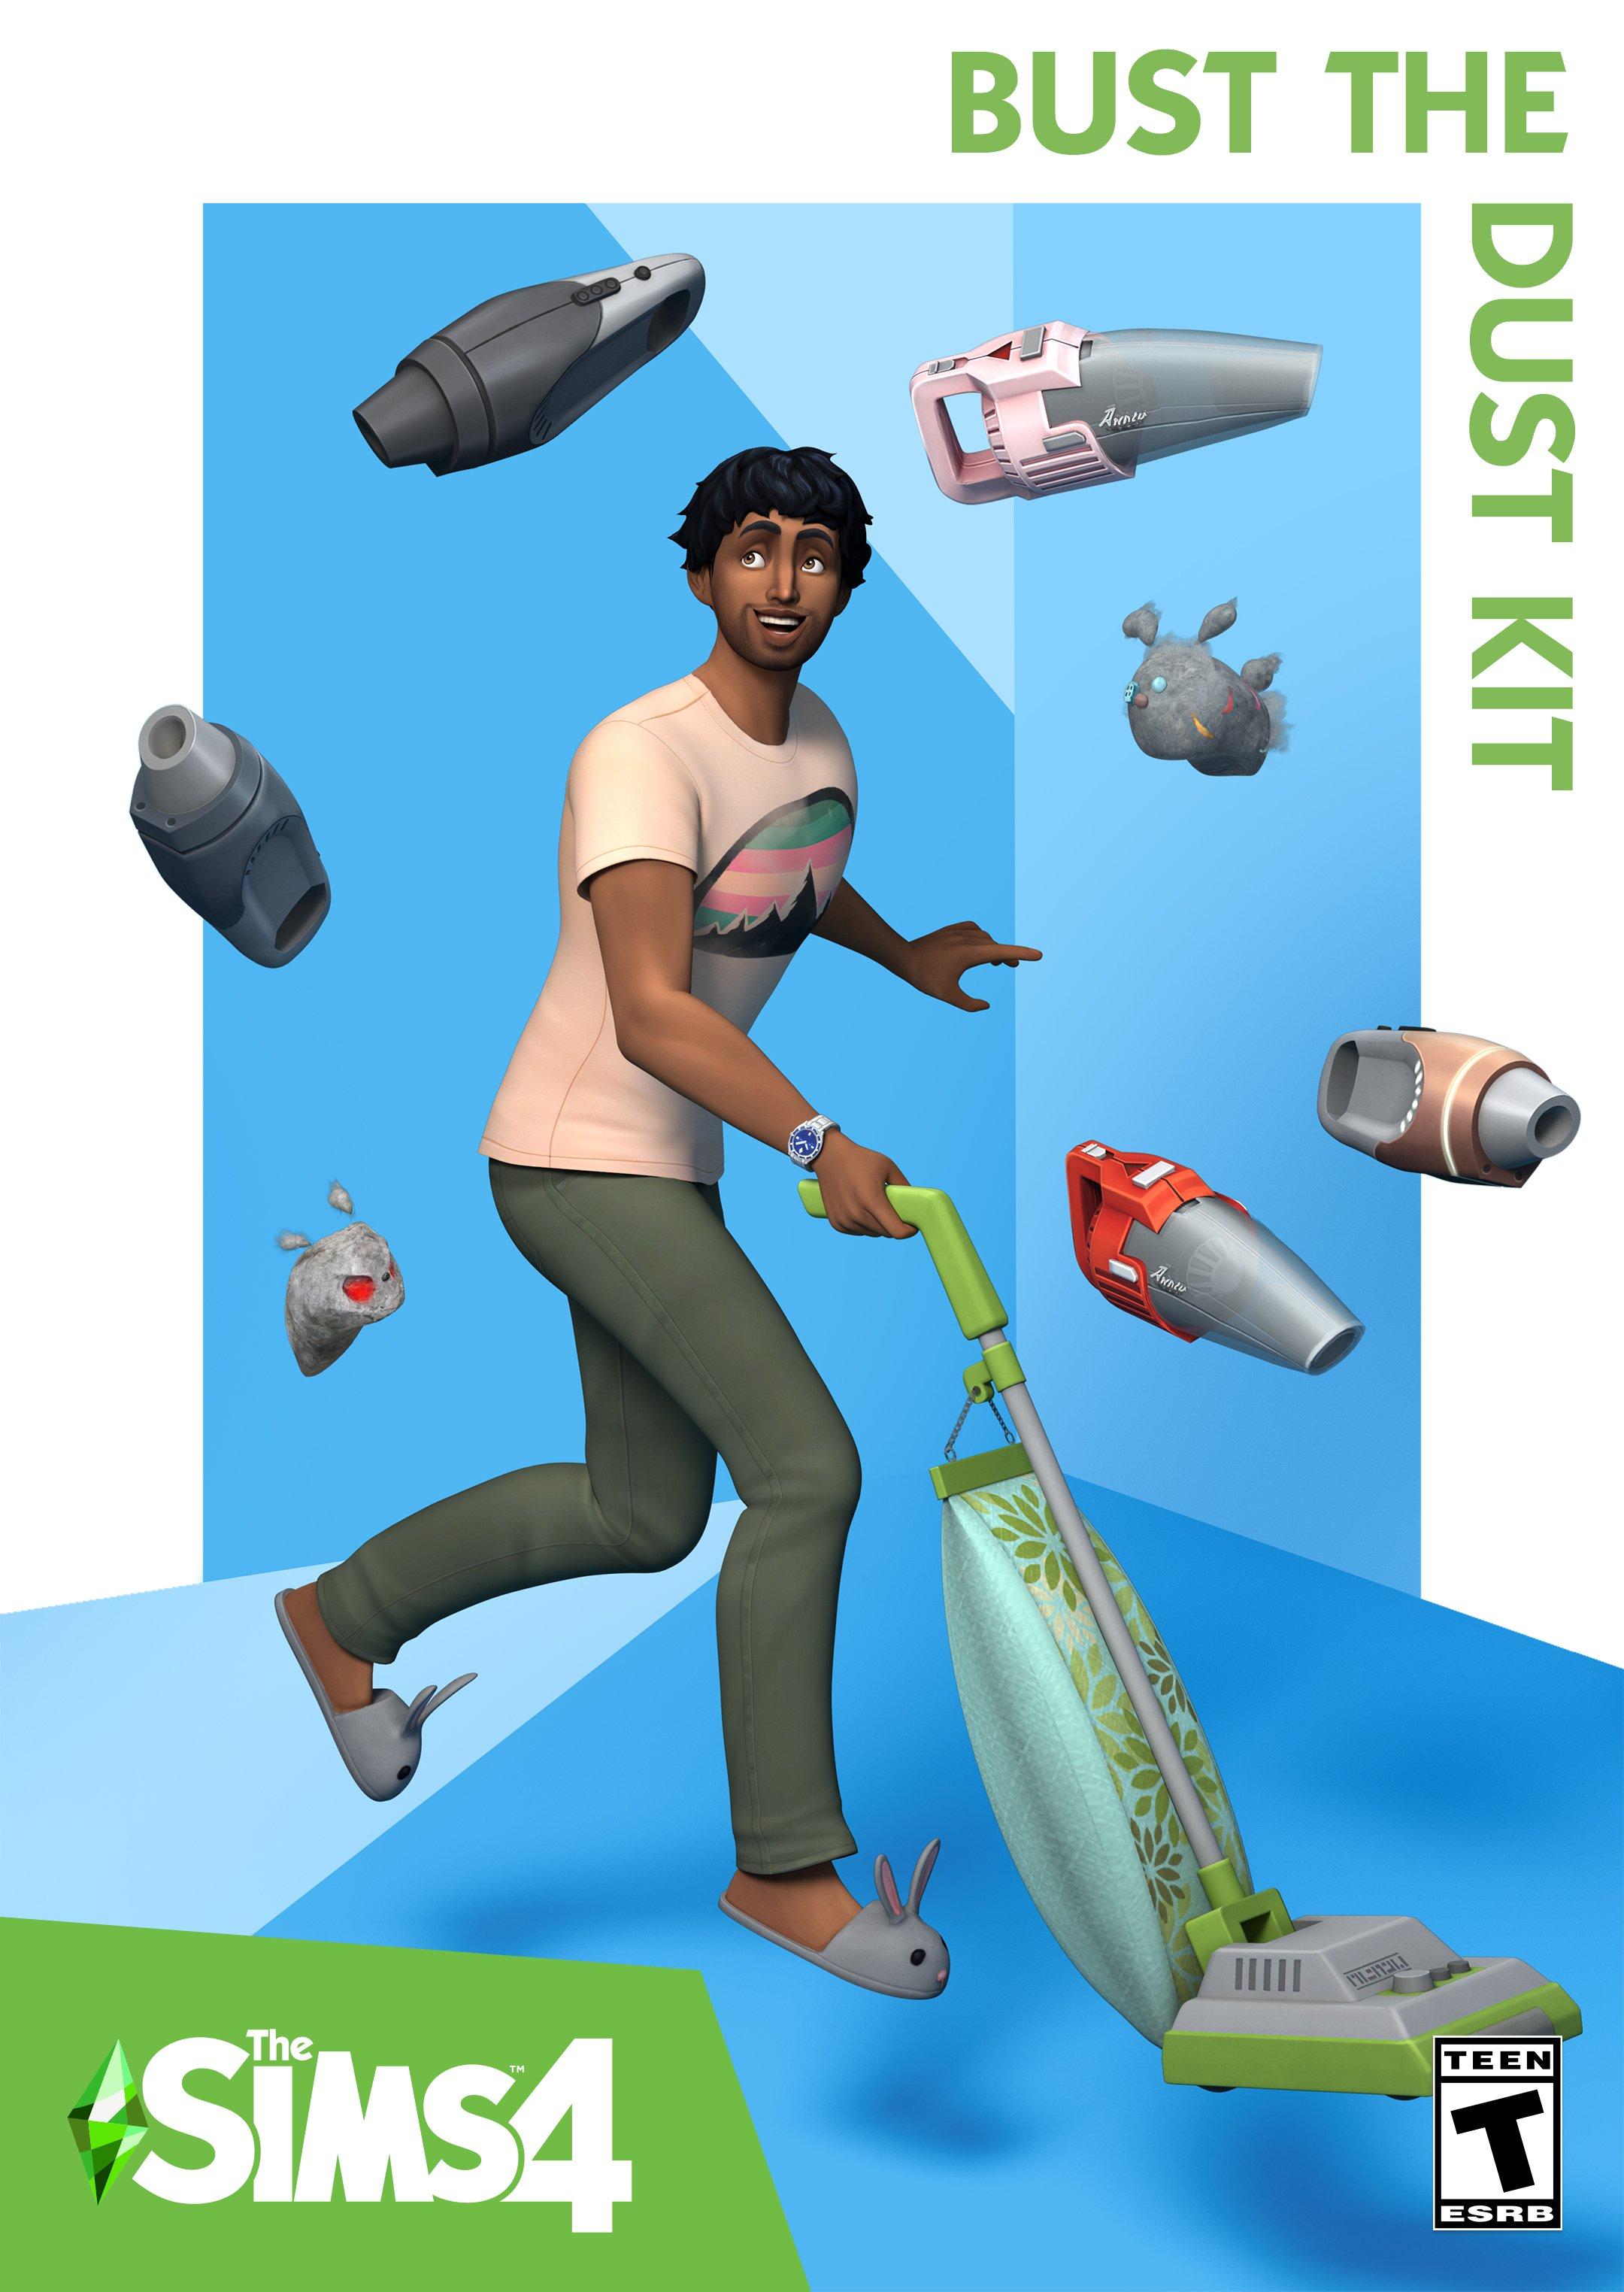 Electronic Arts The Sims 4: Bust The Dust Kit DLC - PC EA app